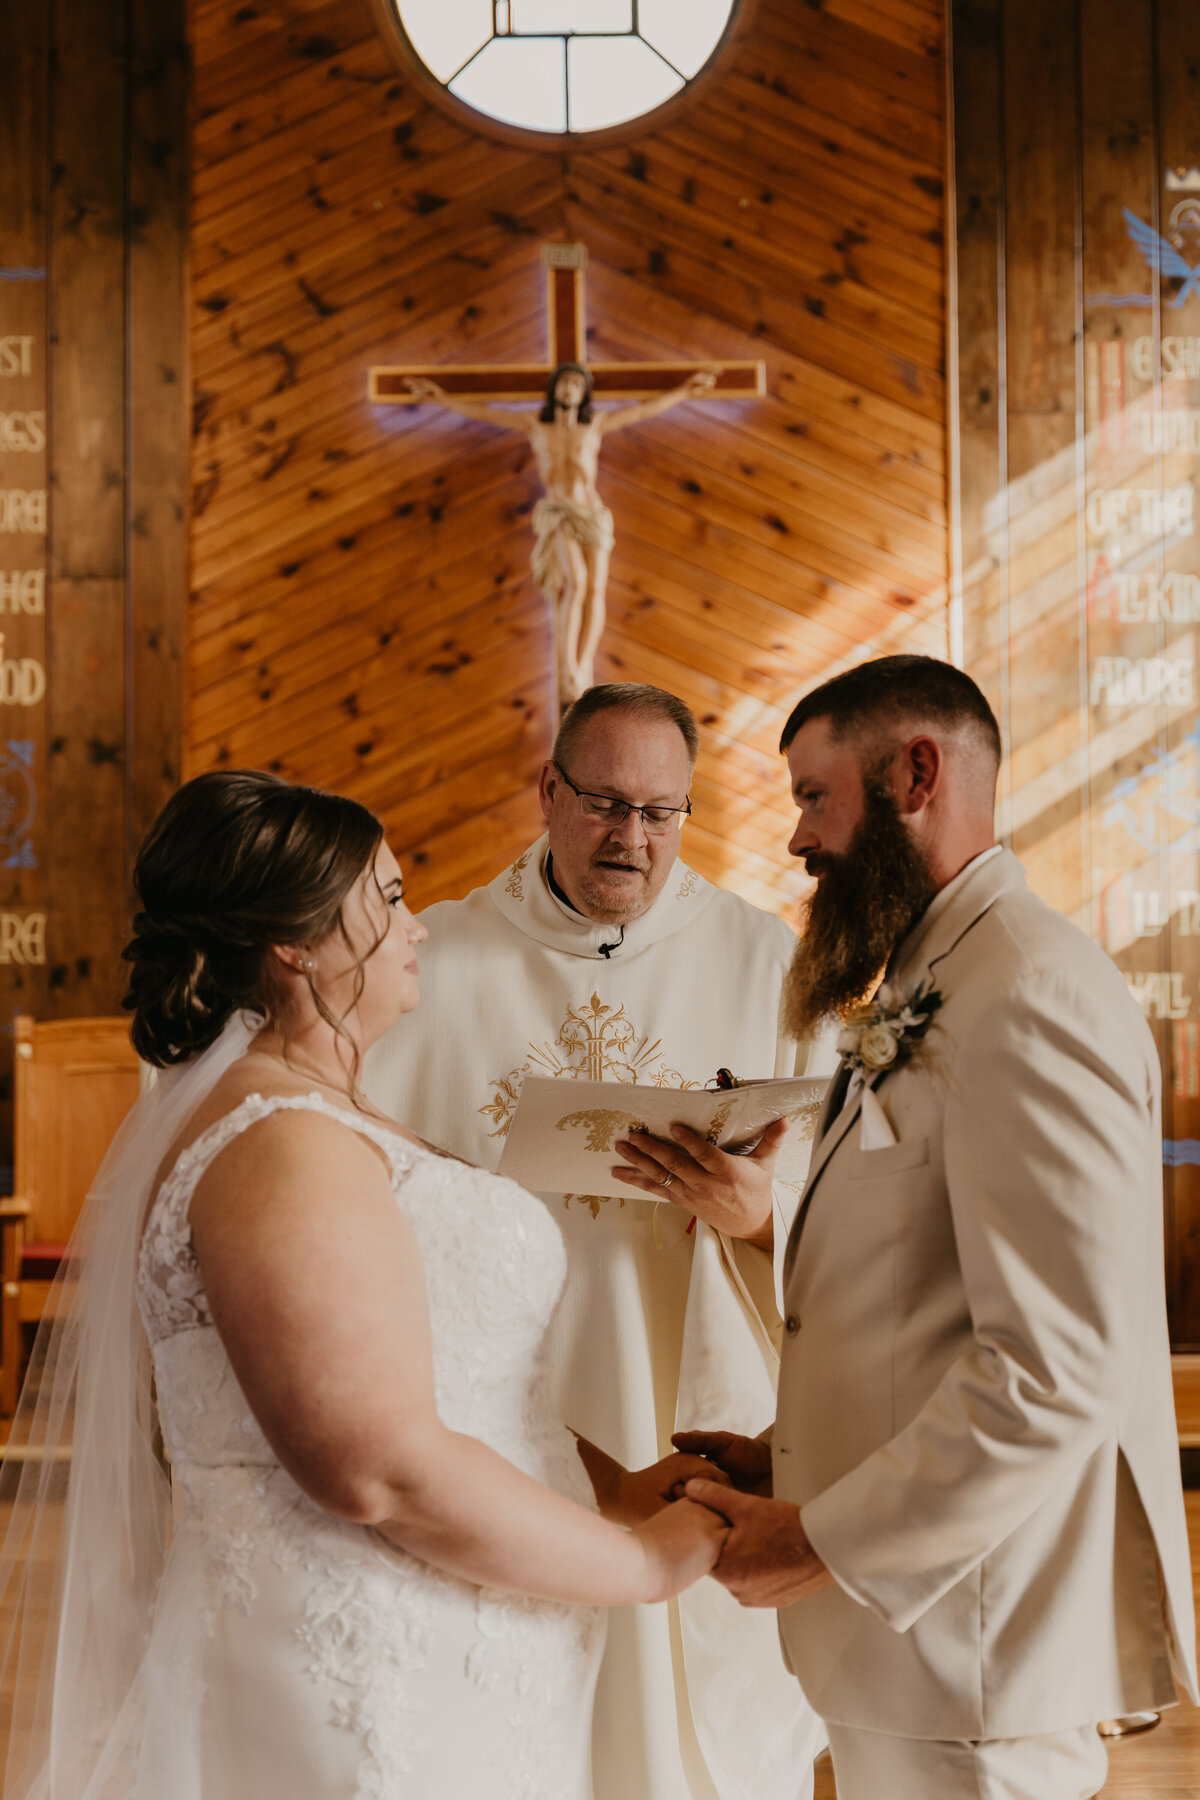 Couple exchanging vows during ceremony on their wedding day.